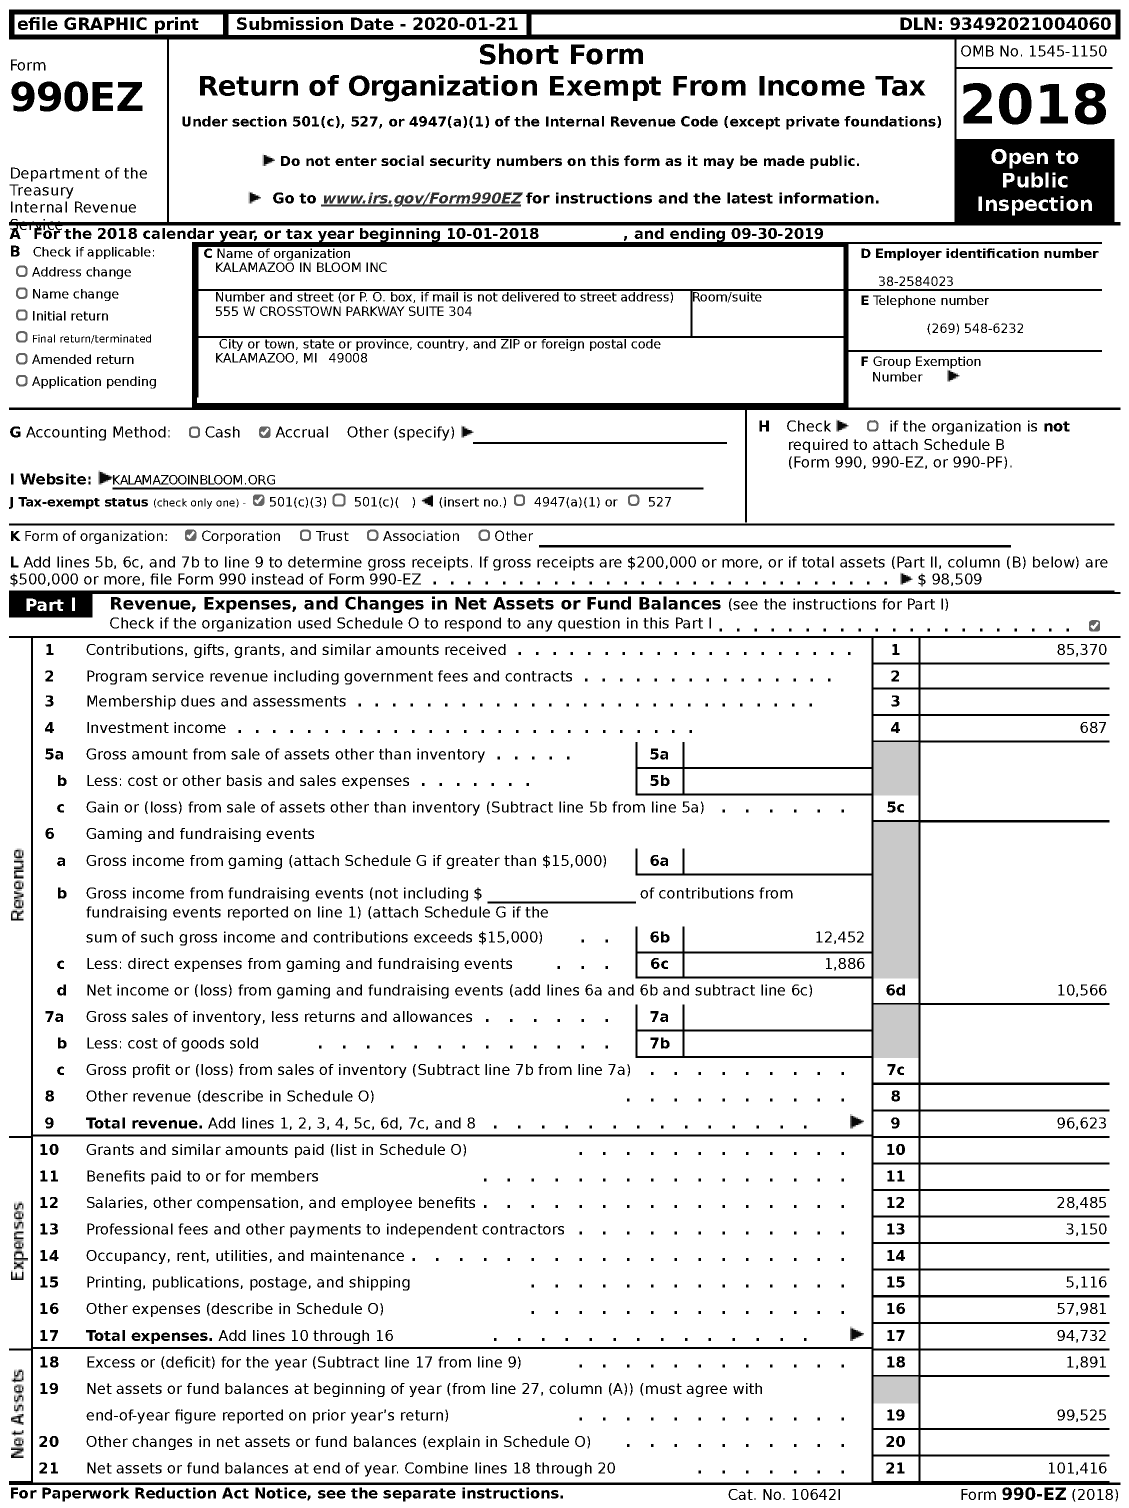 Image of first page of 2018 Form 990EZ for Kalamazoo in Bloom